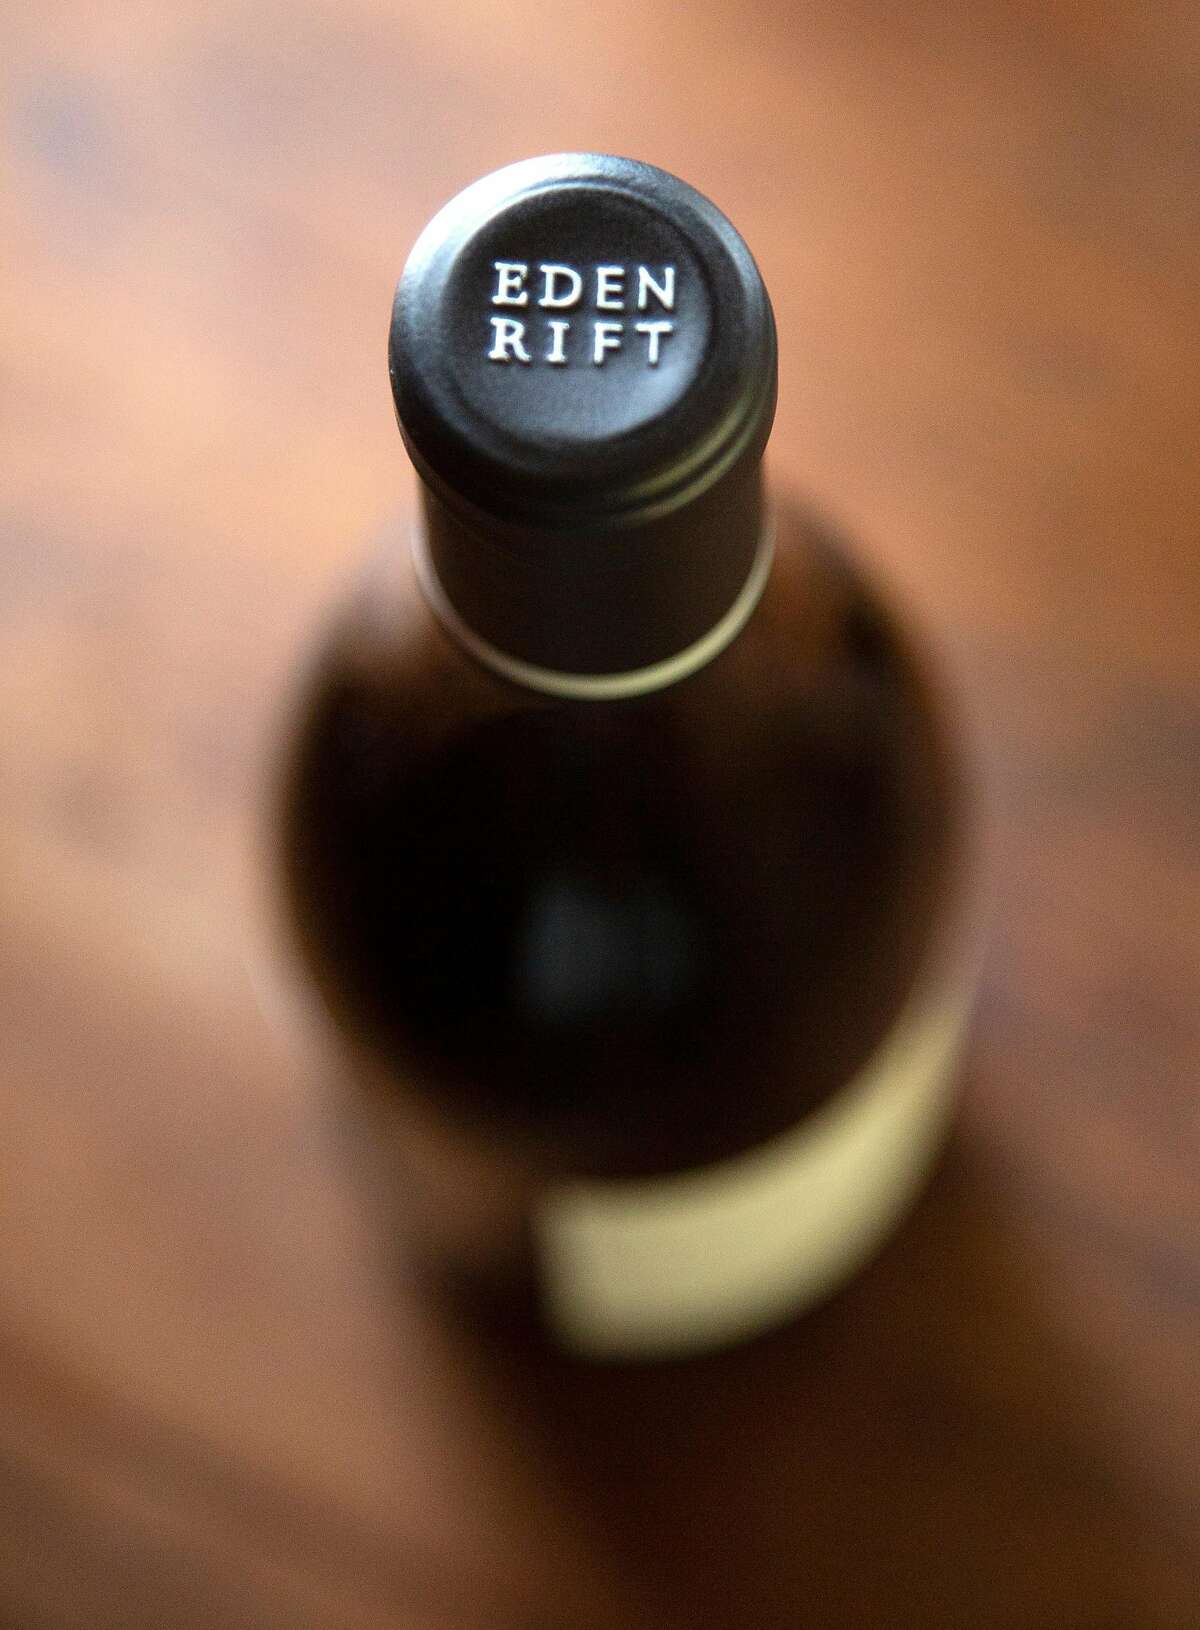 The 2016 Dickinson Block Zinfandel is one of the wines produced at Eden Rift Vineyards on Thursday, 7/26, 2018, in Hollister, California. Eden Rift Vineyards is a historic property in Hollister that has been revived by a new owner.